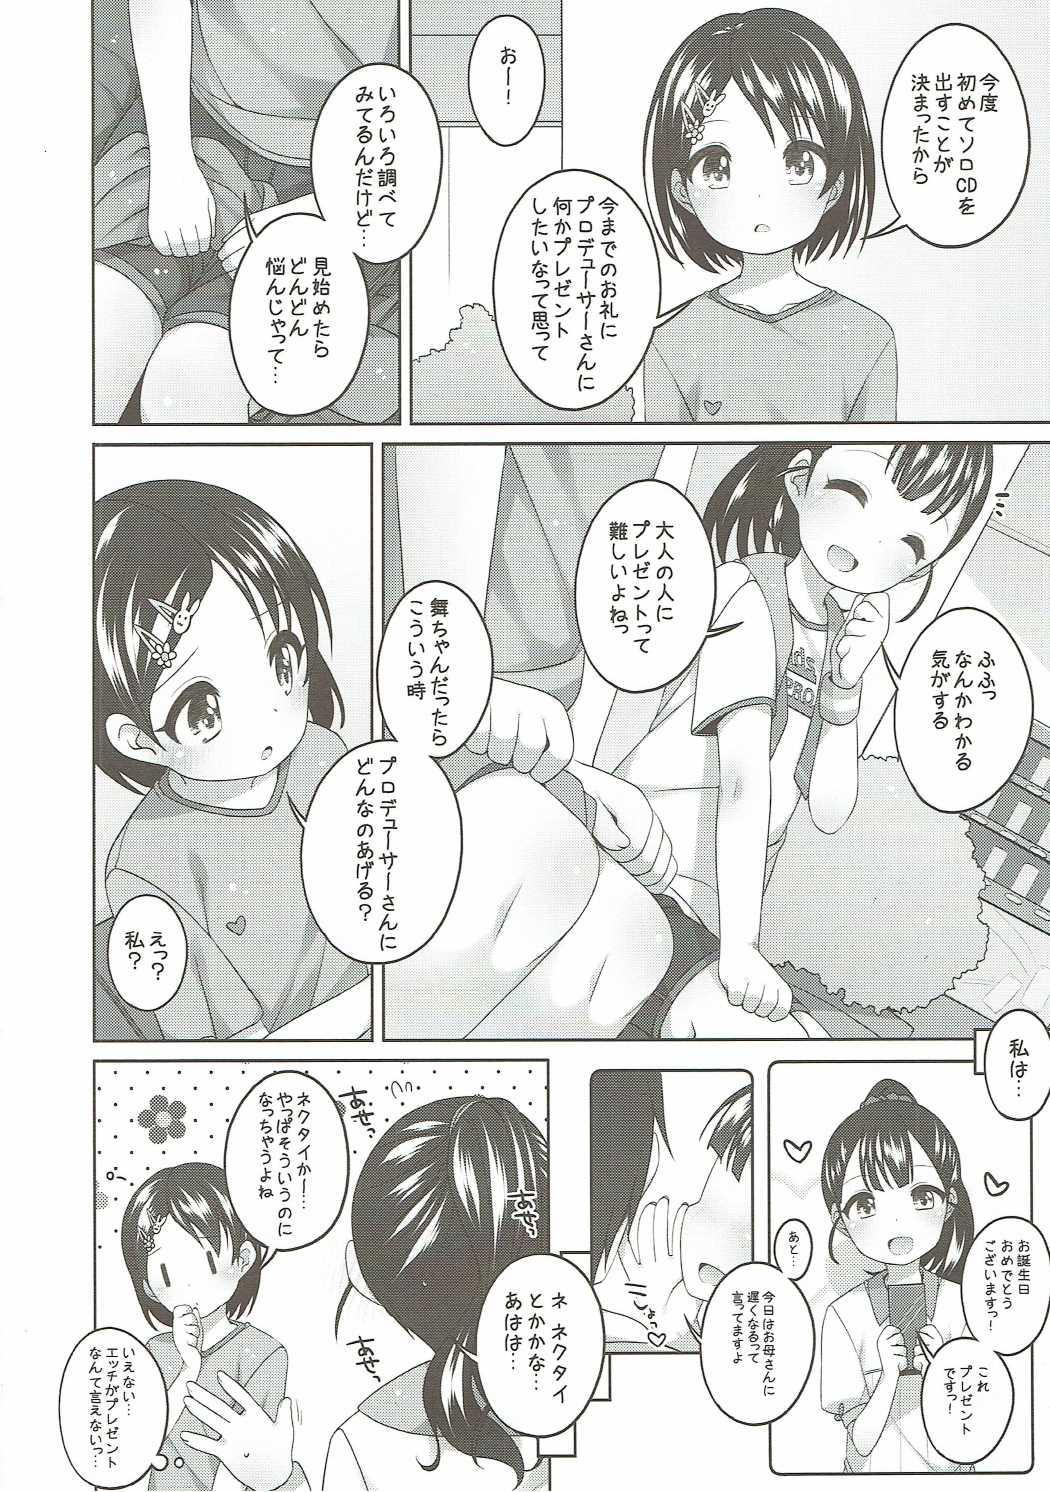 Whipping Ganbare! Chie-chan - The idolmaster Insane Porn - Page 5